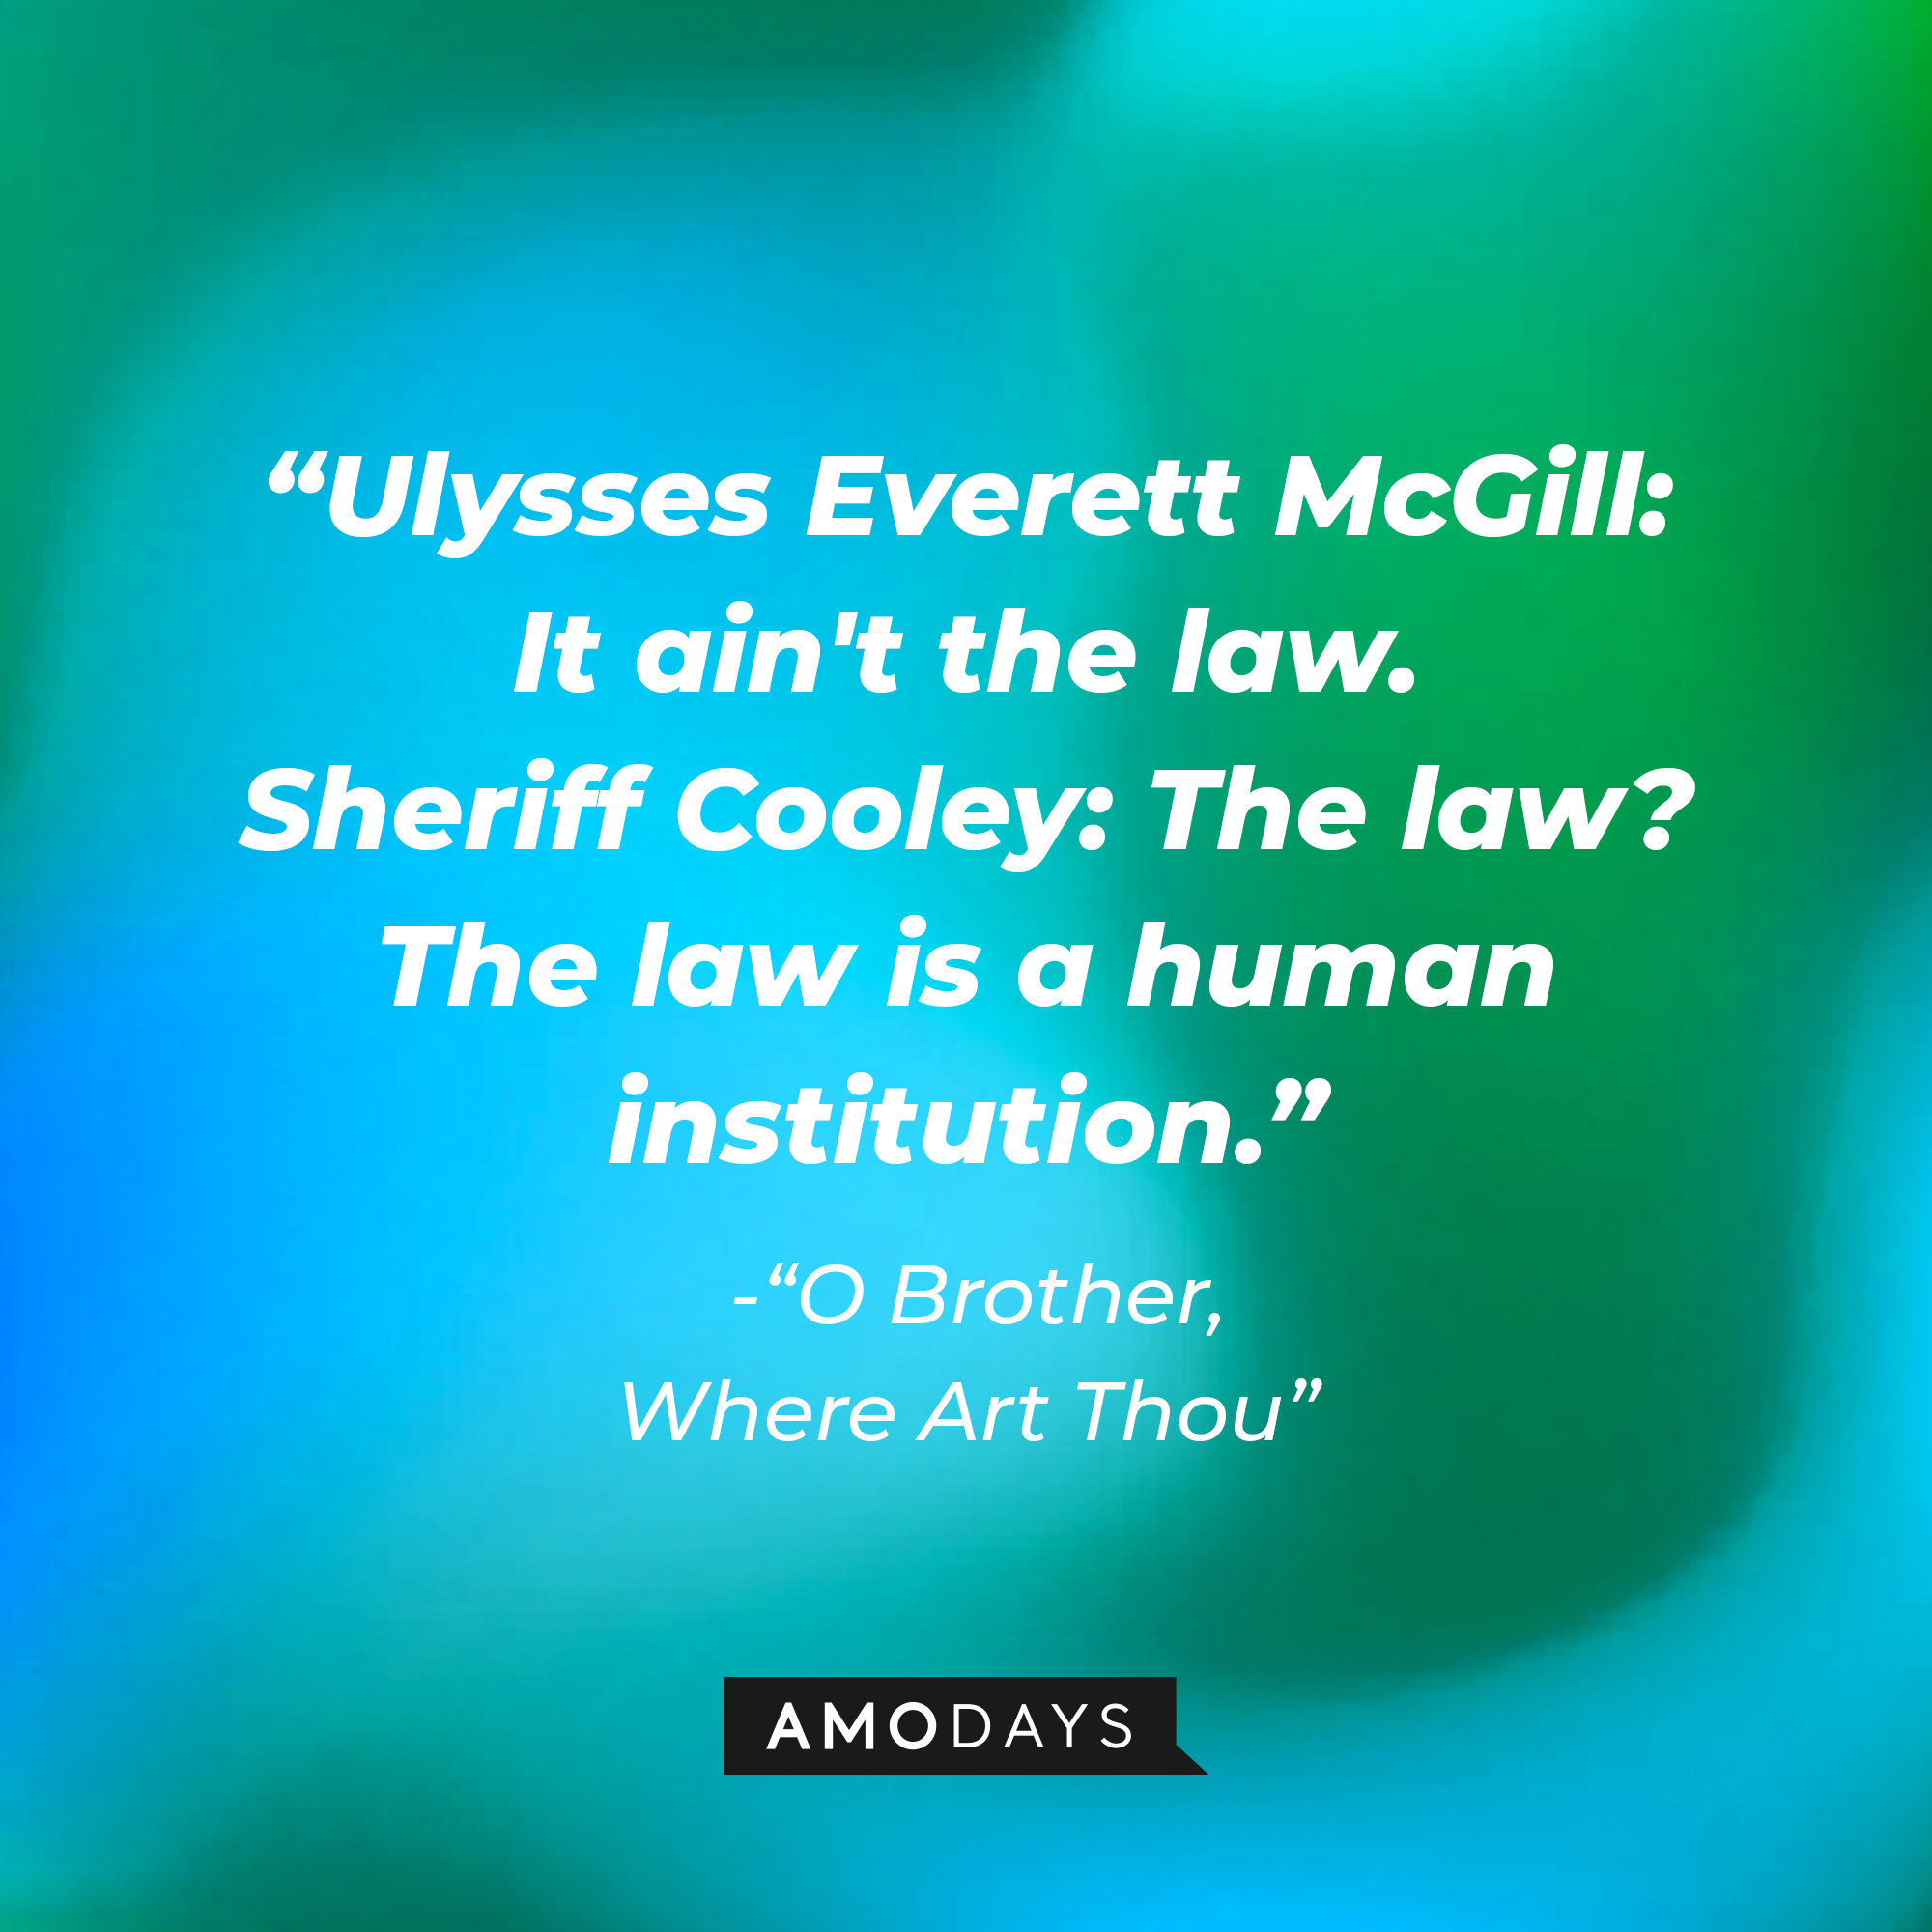 Ulysses Everett McGill's dialogue in "O Brother, Where Art Thou:" "Ulysses Everett McGill: It ain't the law. ; Sheriff Cooley: The law? The law is a human institution." | Source: AmoDays